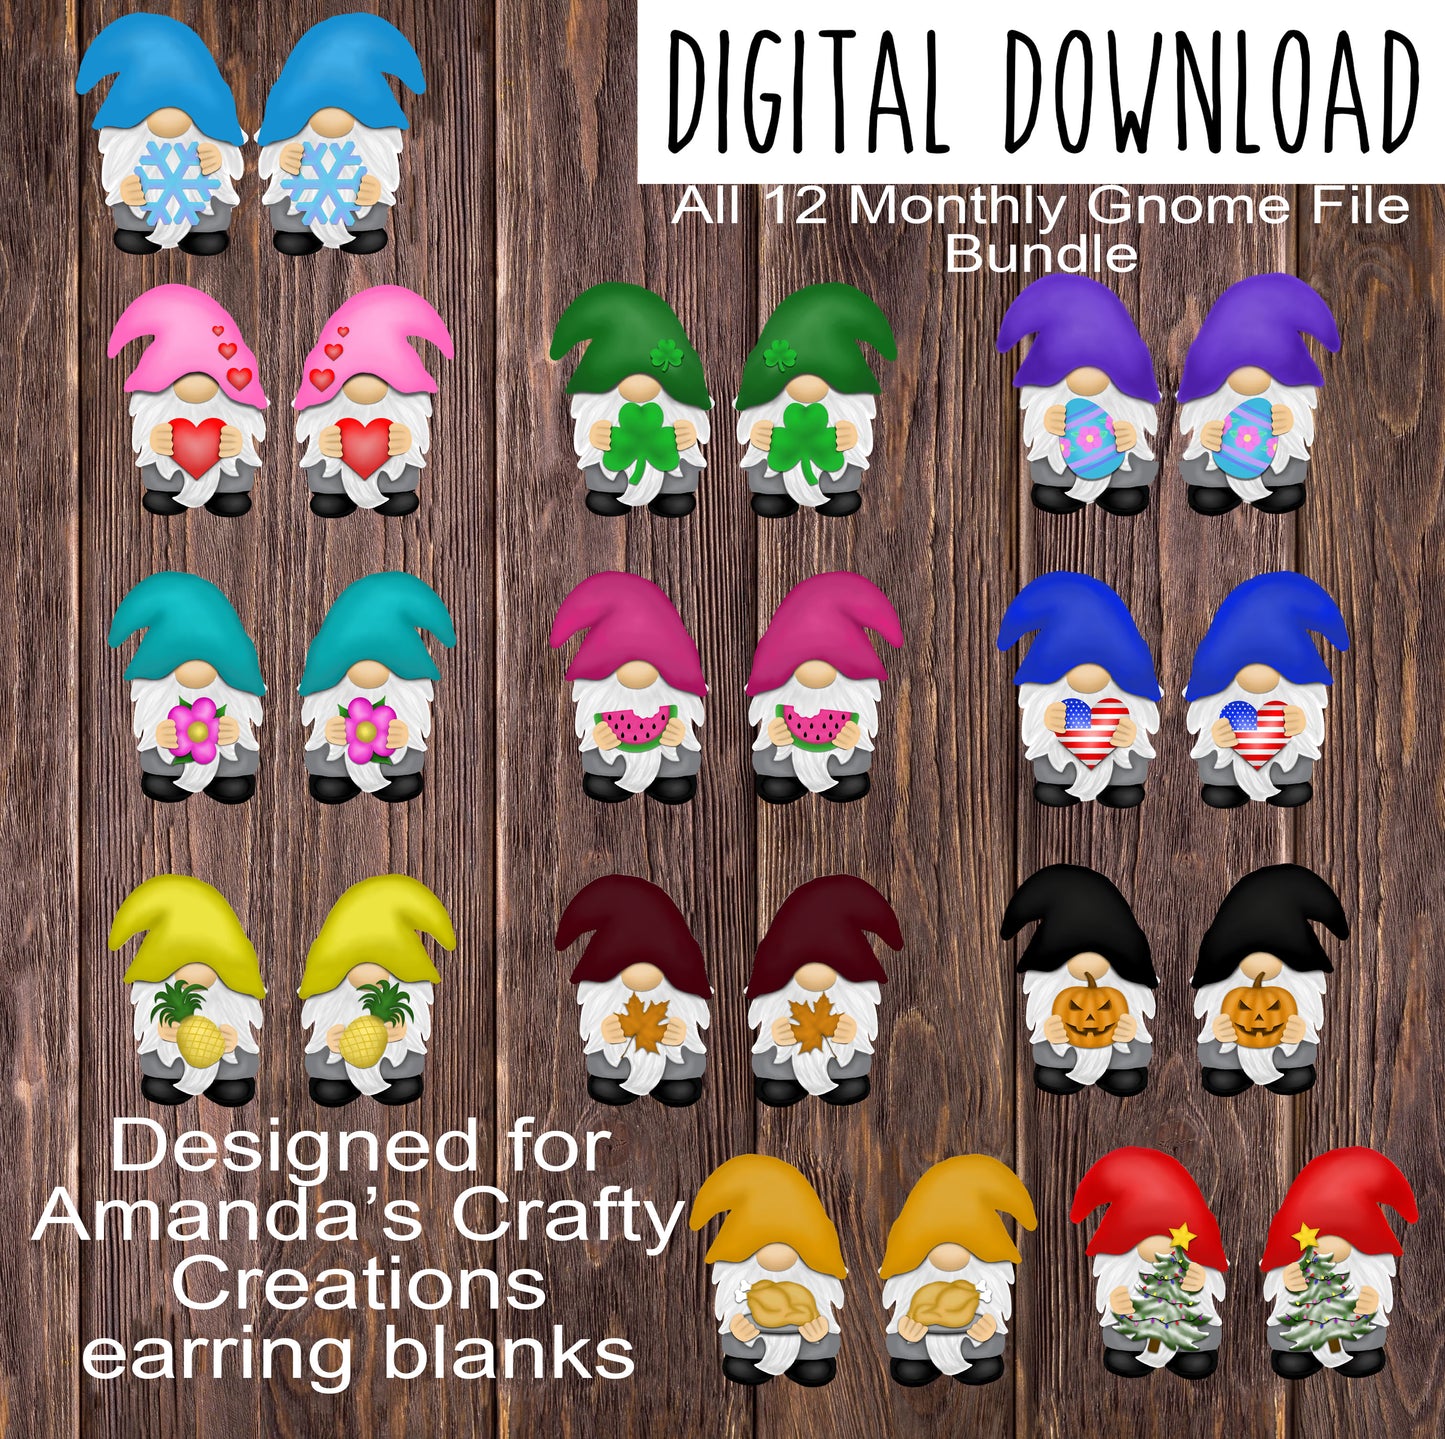 All 12 Months Gnome Earring Sublimation Design, Hand drawn Gnome Sublimation earring design, digital download, JPG, PNG